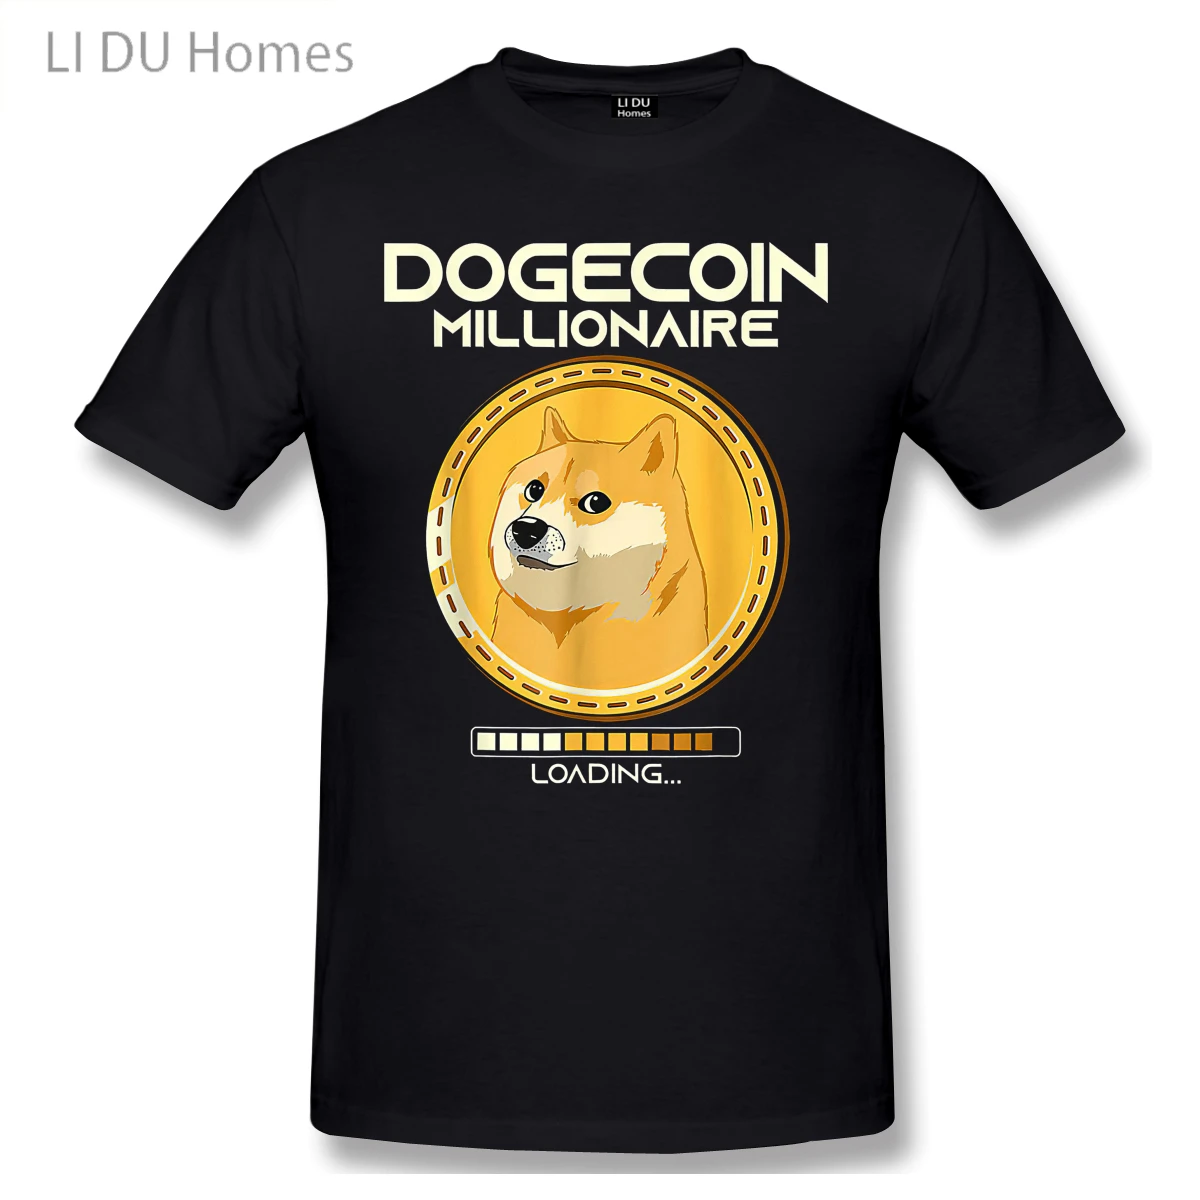 

LIDU Dogecoin Millionaire Loading Cool Doge Coin Crypto Currency T Shirts Women Man's T-shirt Summer Tshirts Graphics Tee Tops